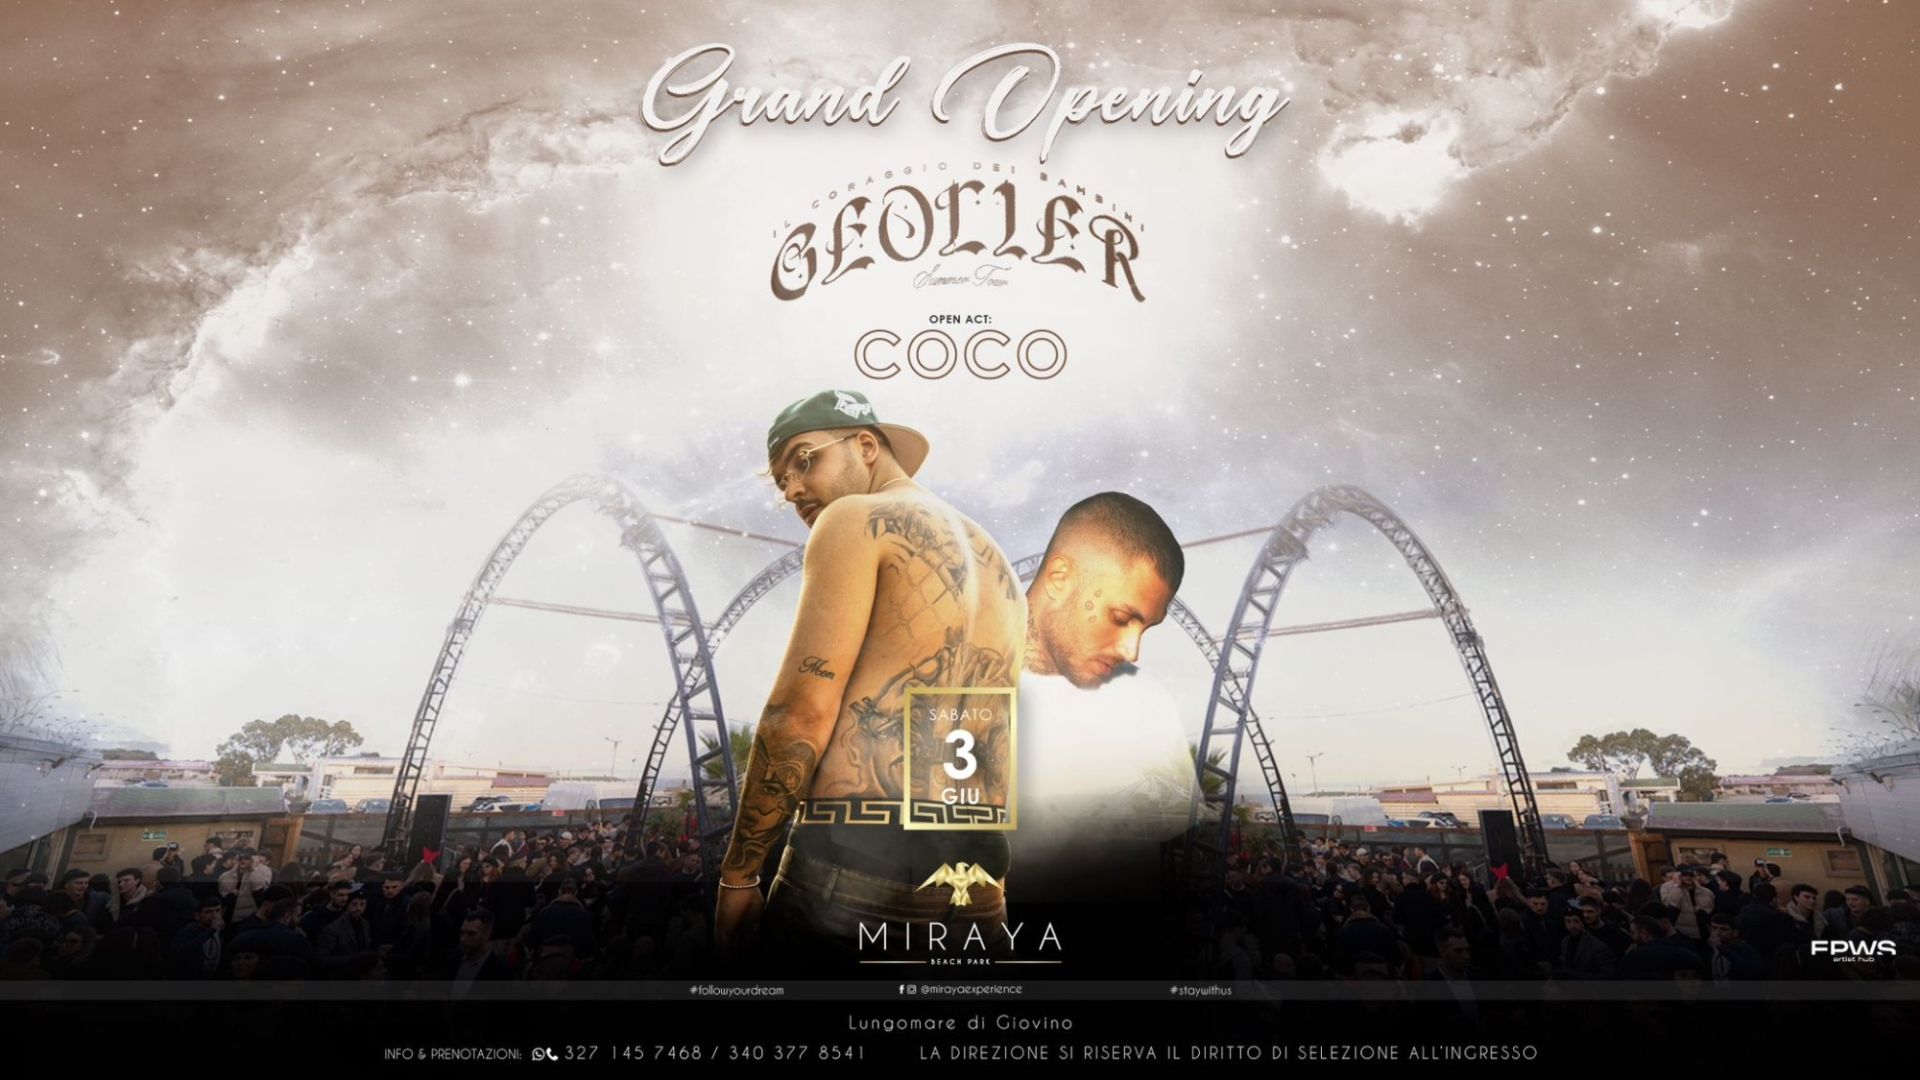 Geolier - Open Act Coco - Grand Opening